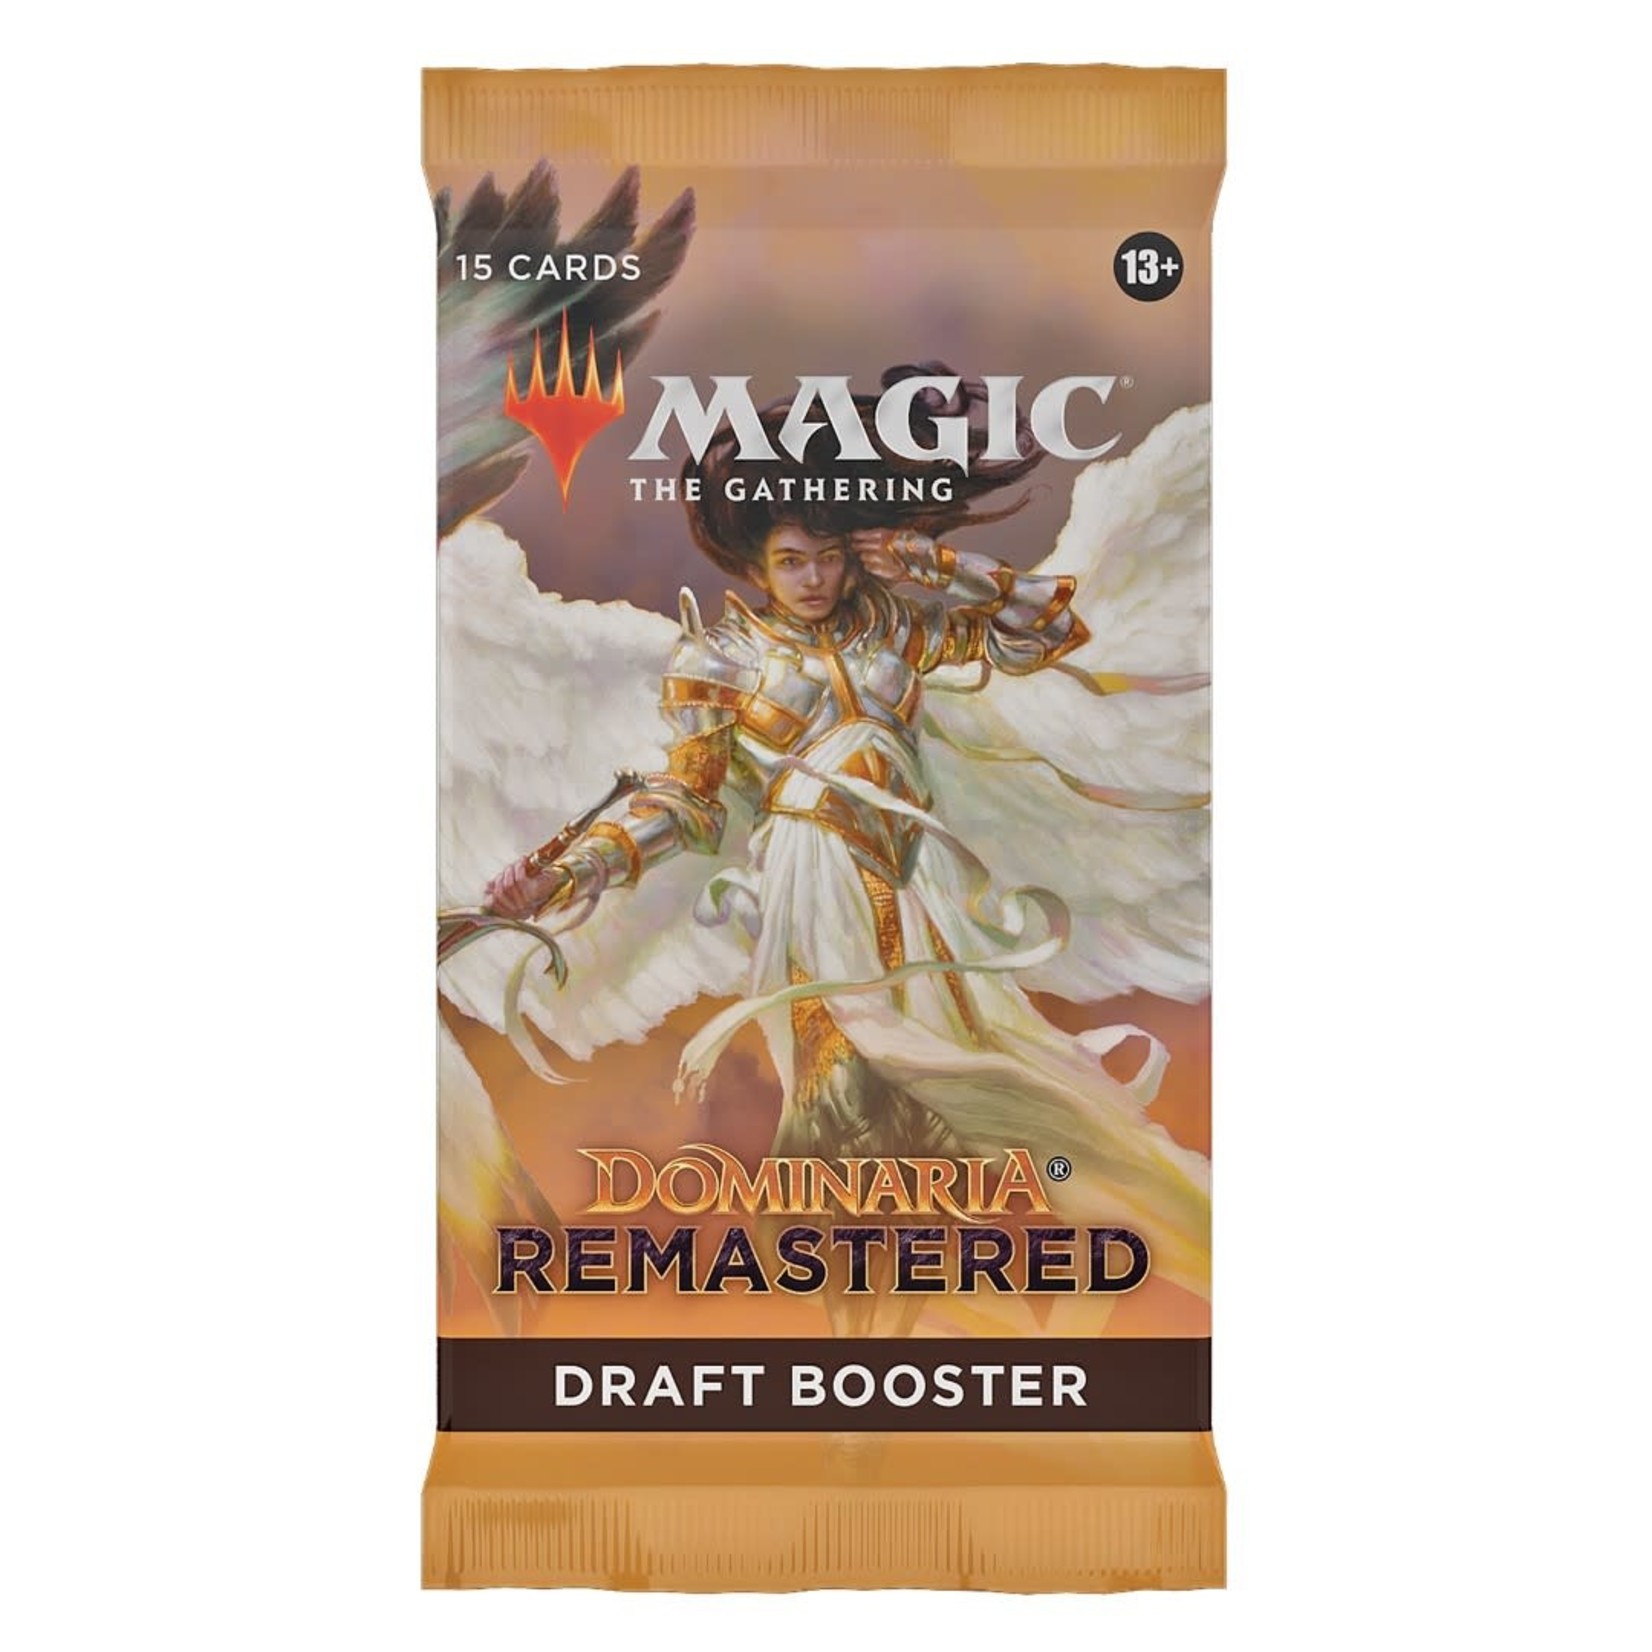 Wizards of the Coast Magic the Gathering Dominaria Remastered Draft Booster Pack DMR